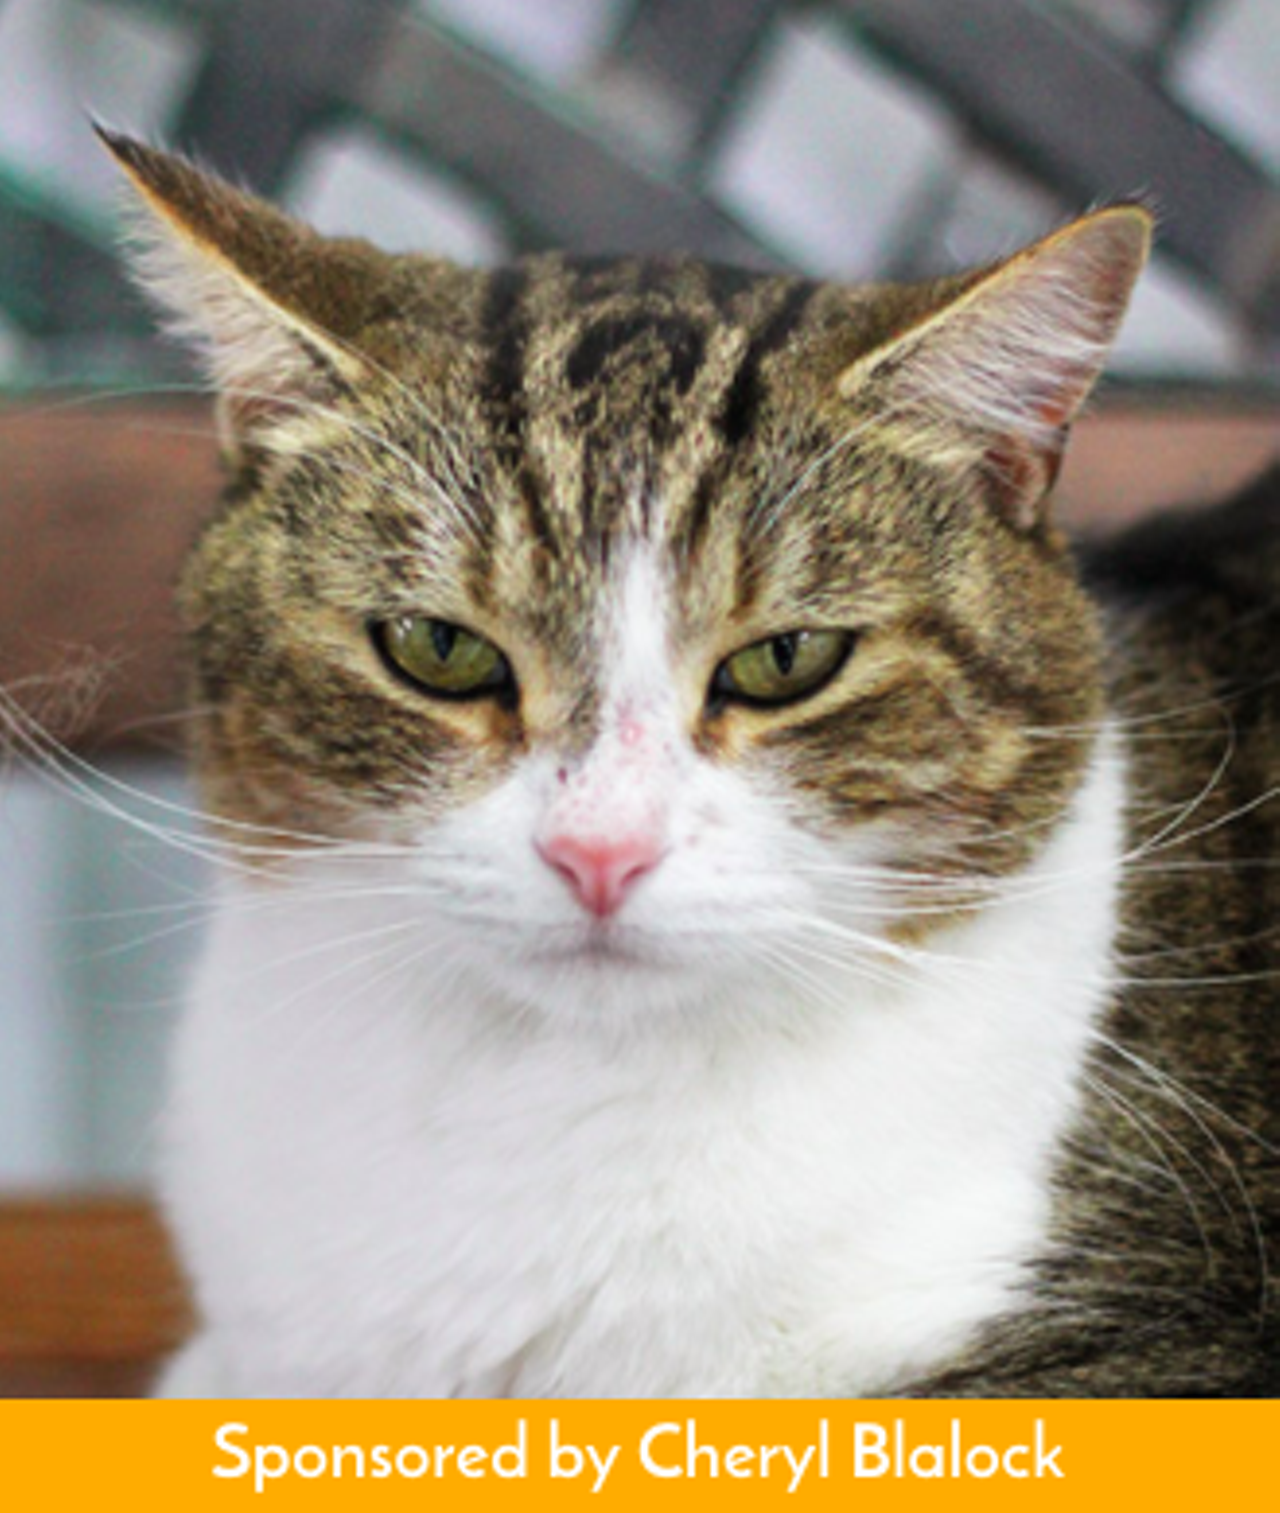 EddyHello there! I am Eddy. This is my best unimpressed expression. On a fun day, I get to lounge around, sleep, relax and just be lazy. That’s my idea of a fun day! If you feel the same, then come by and meet me! I’ll be ready to show you the many unimpressed faces of Eddy! You can pet me if you want to and I’ll be totally fine with it. I’m just ready to move into a forever home where I can chill with you!